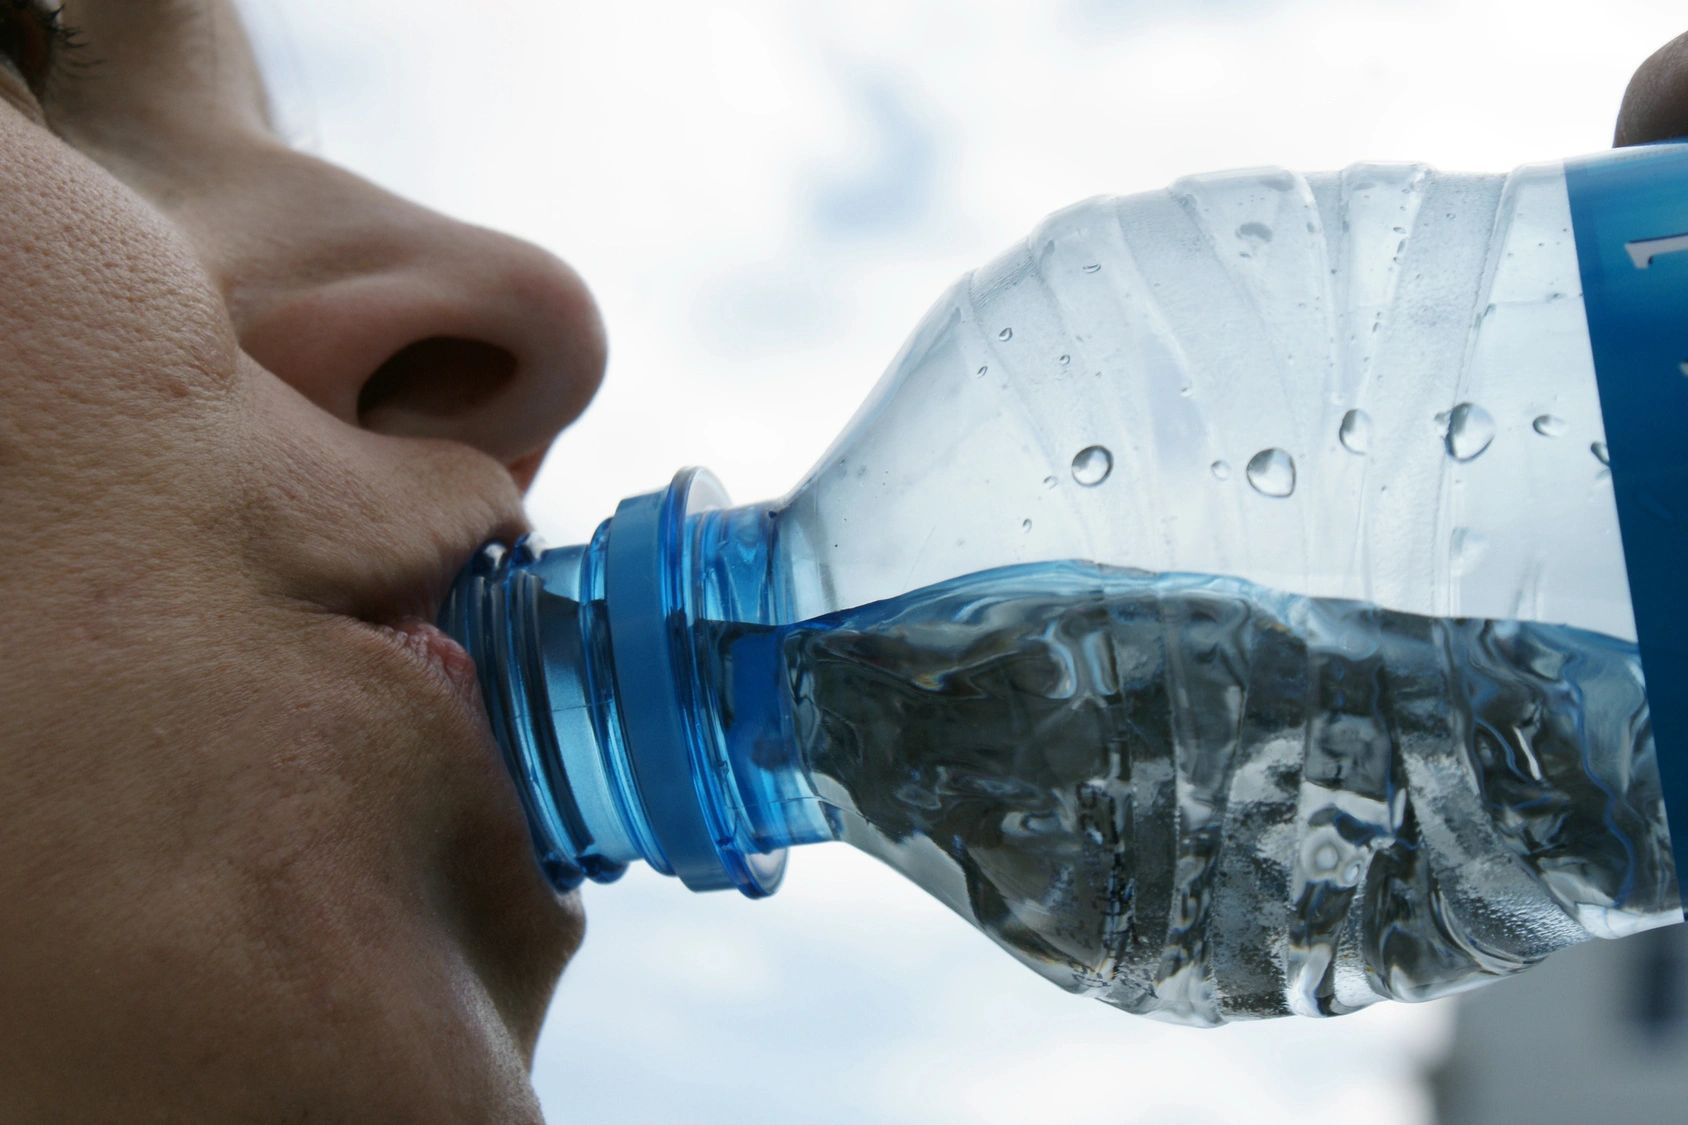 hydration impacts overall health